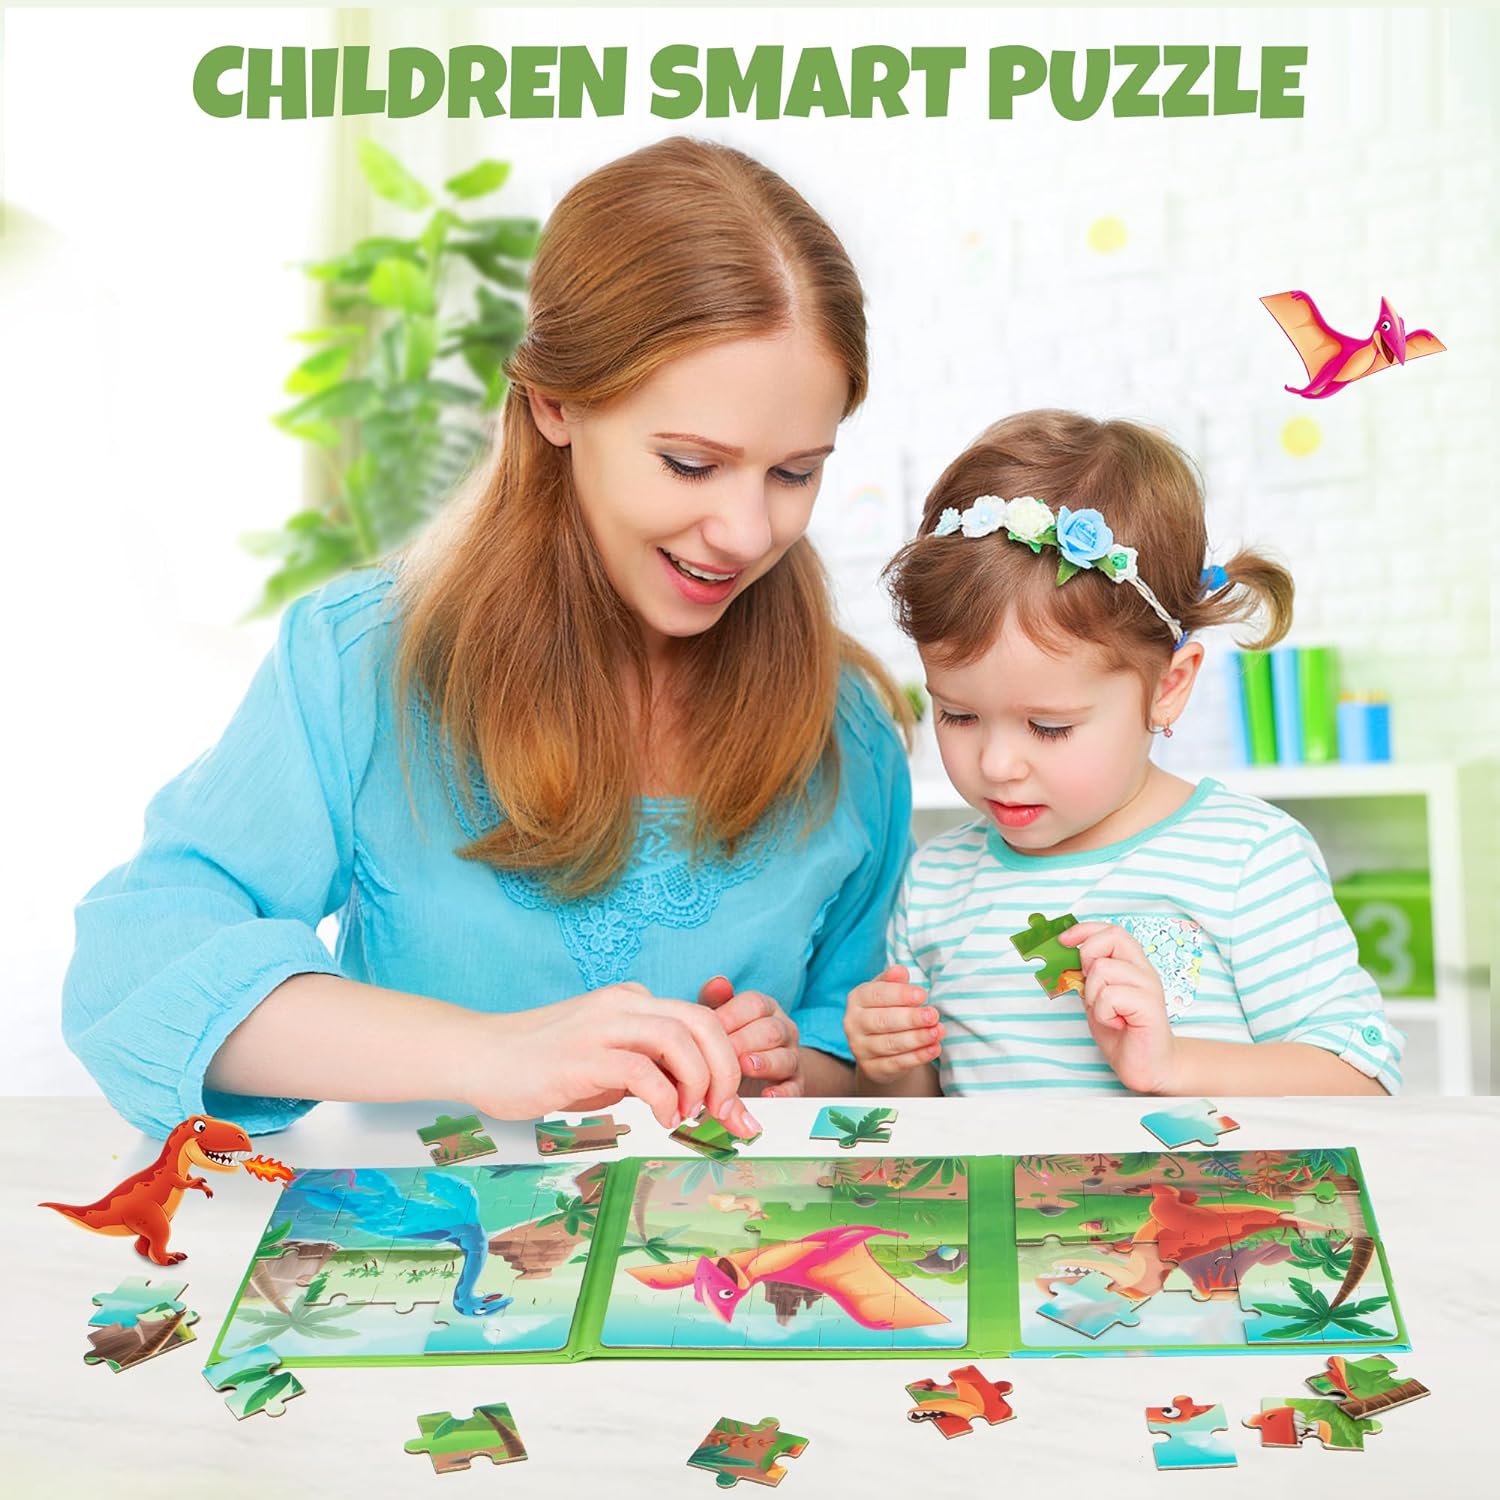 SYNARRY Magnetic Puzzles for Kids Ages 3-5, 20 Pieces Toddler Puzzles, Kids Travel Activity Toys Travel Games for Kids Ages 3-5 in Car Airplane Road Trip, Travel Puzzles for 3 4 5 Year Olds